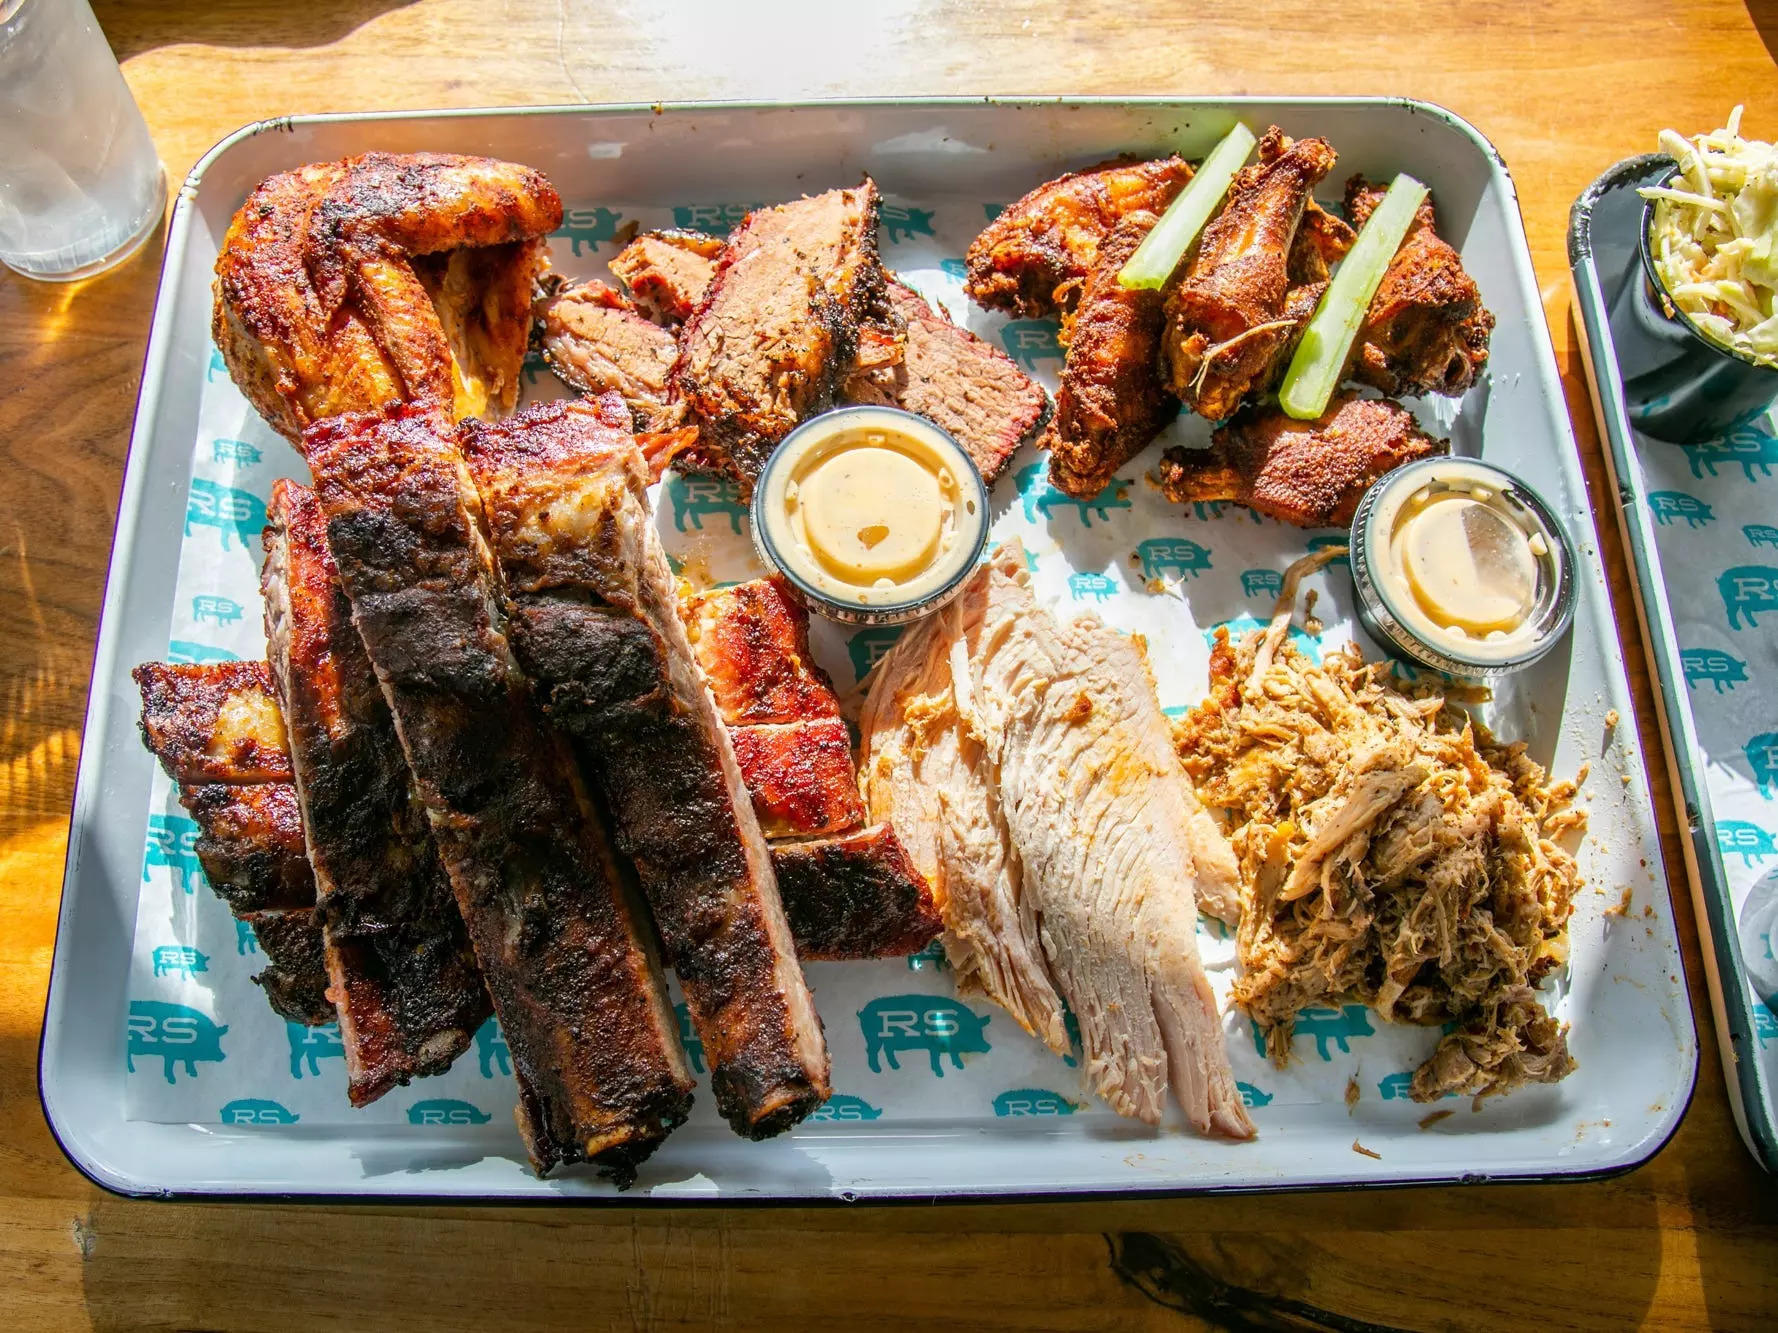 
A pitmaster shares 4 tips for ordering at a barbecue restaurant if you want the best meal
